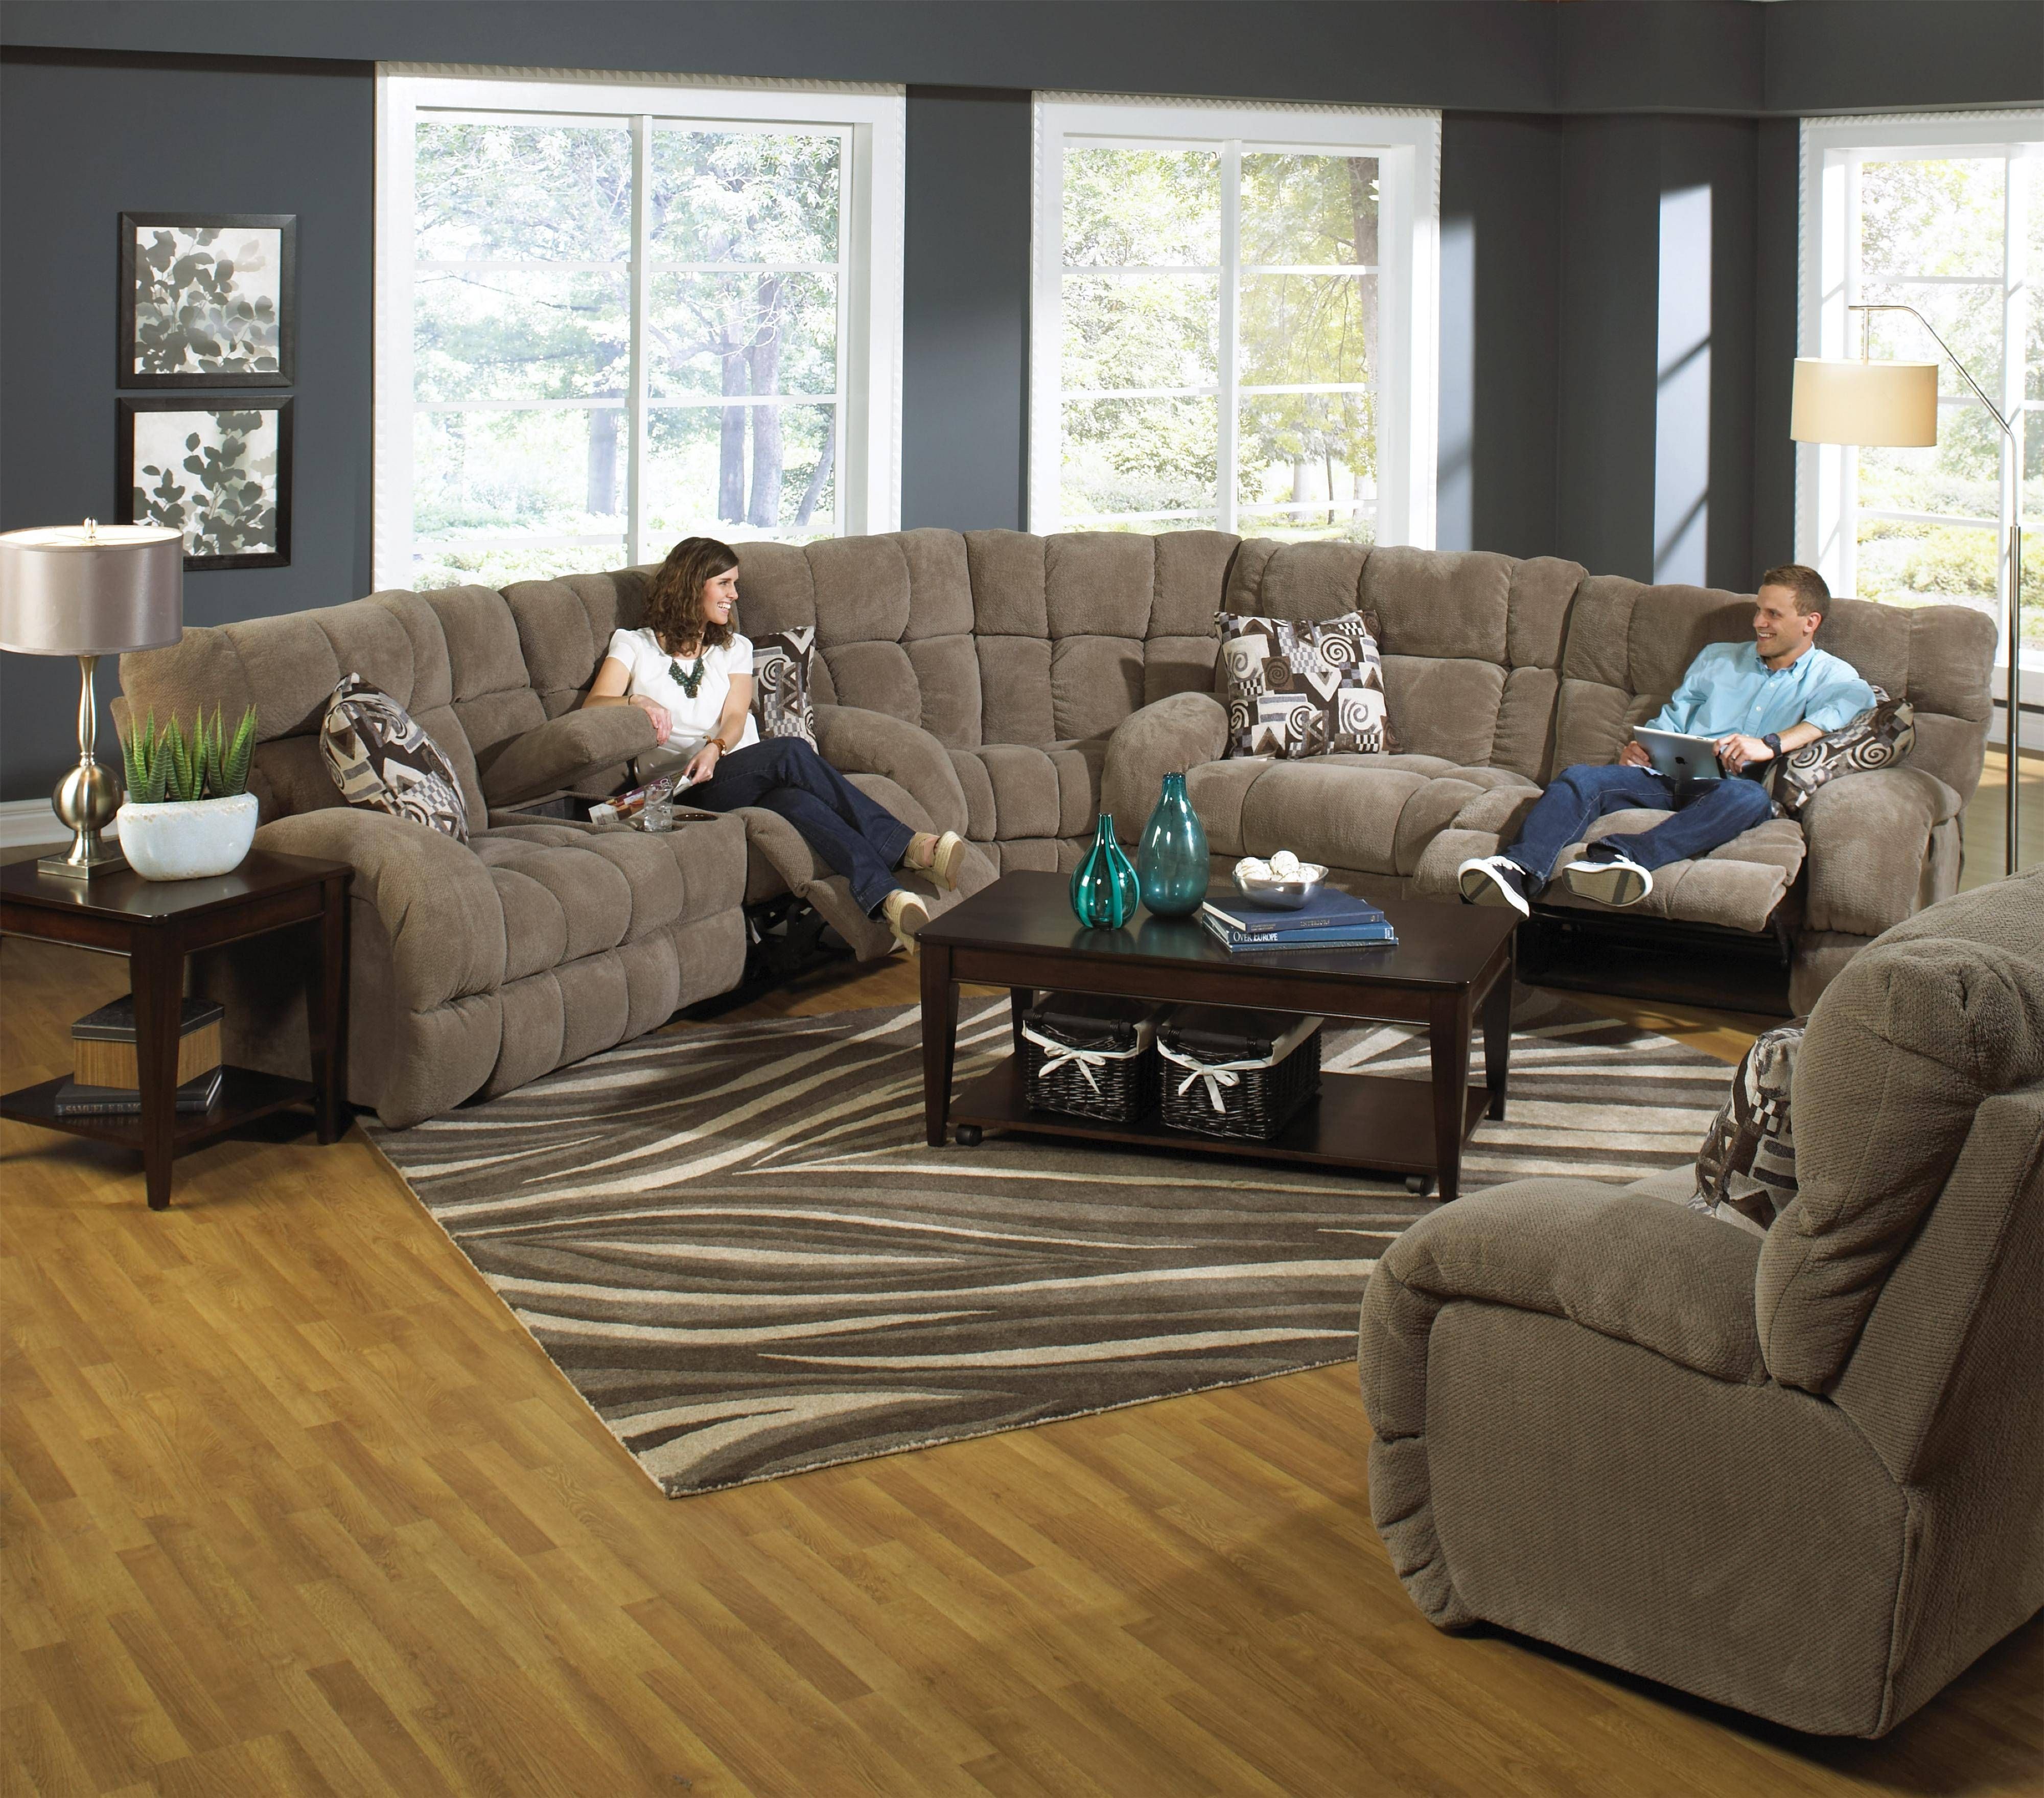 Power Reclining Sectional Sofa With Cup Holderscatnapper With Regard To Catnapper Sofas (View 13 of 15)